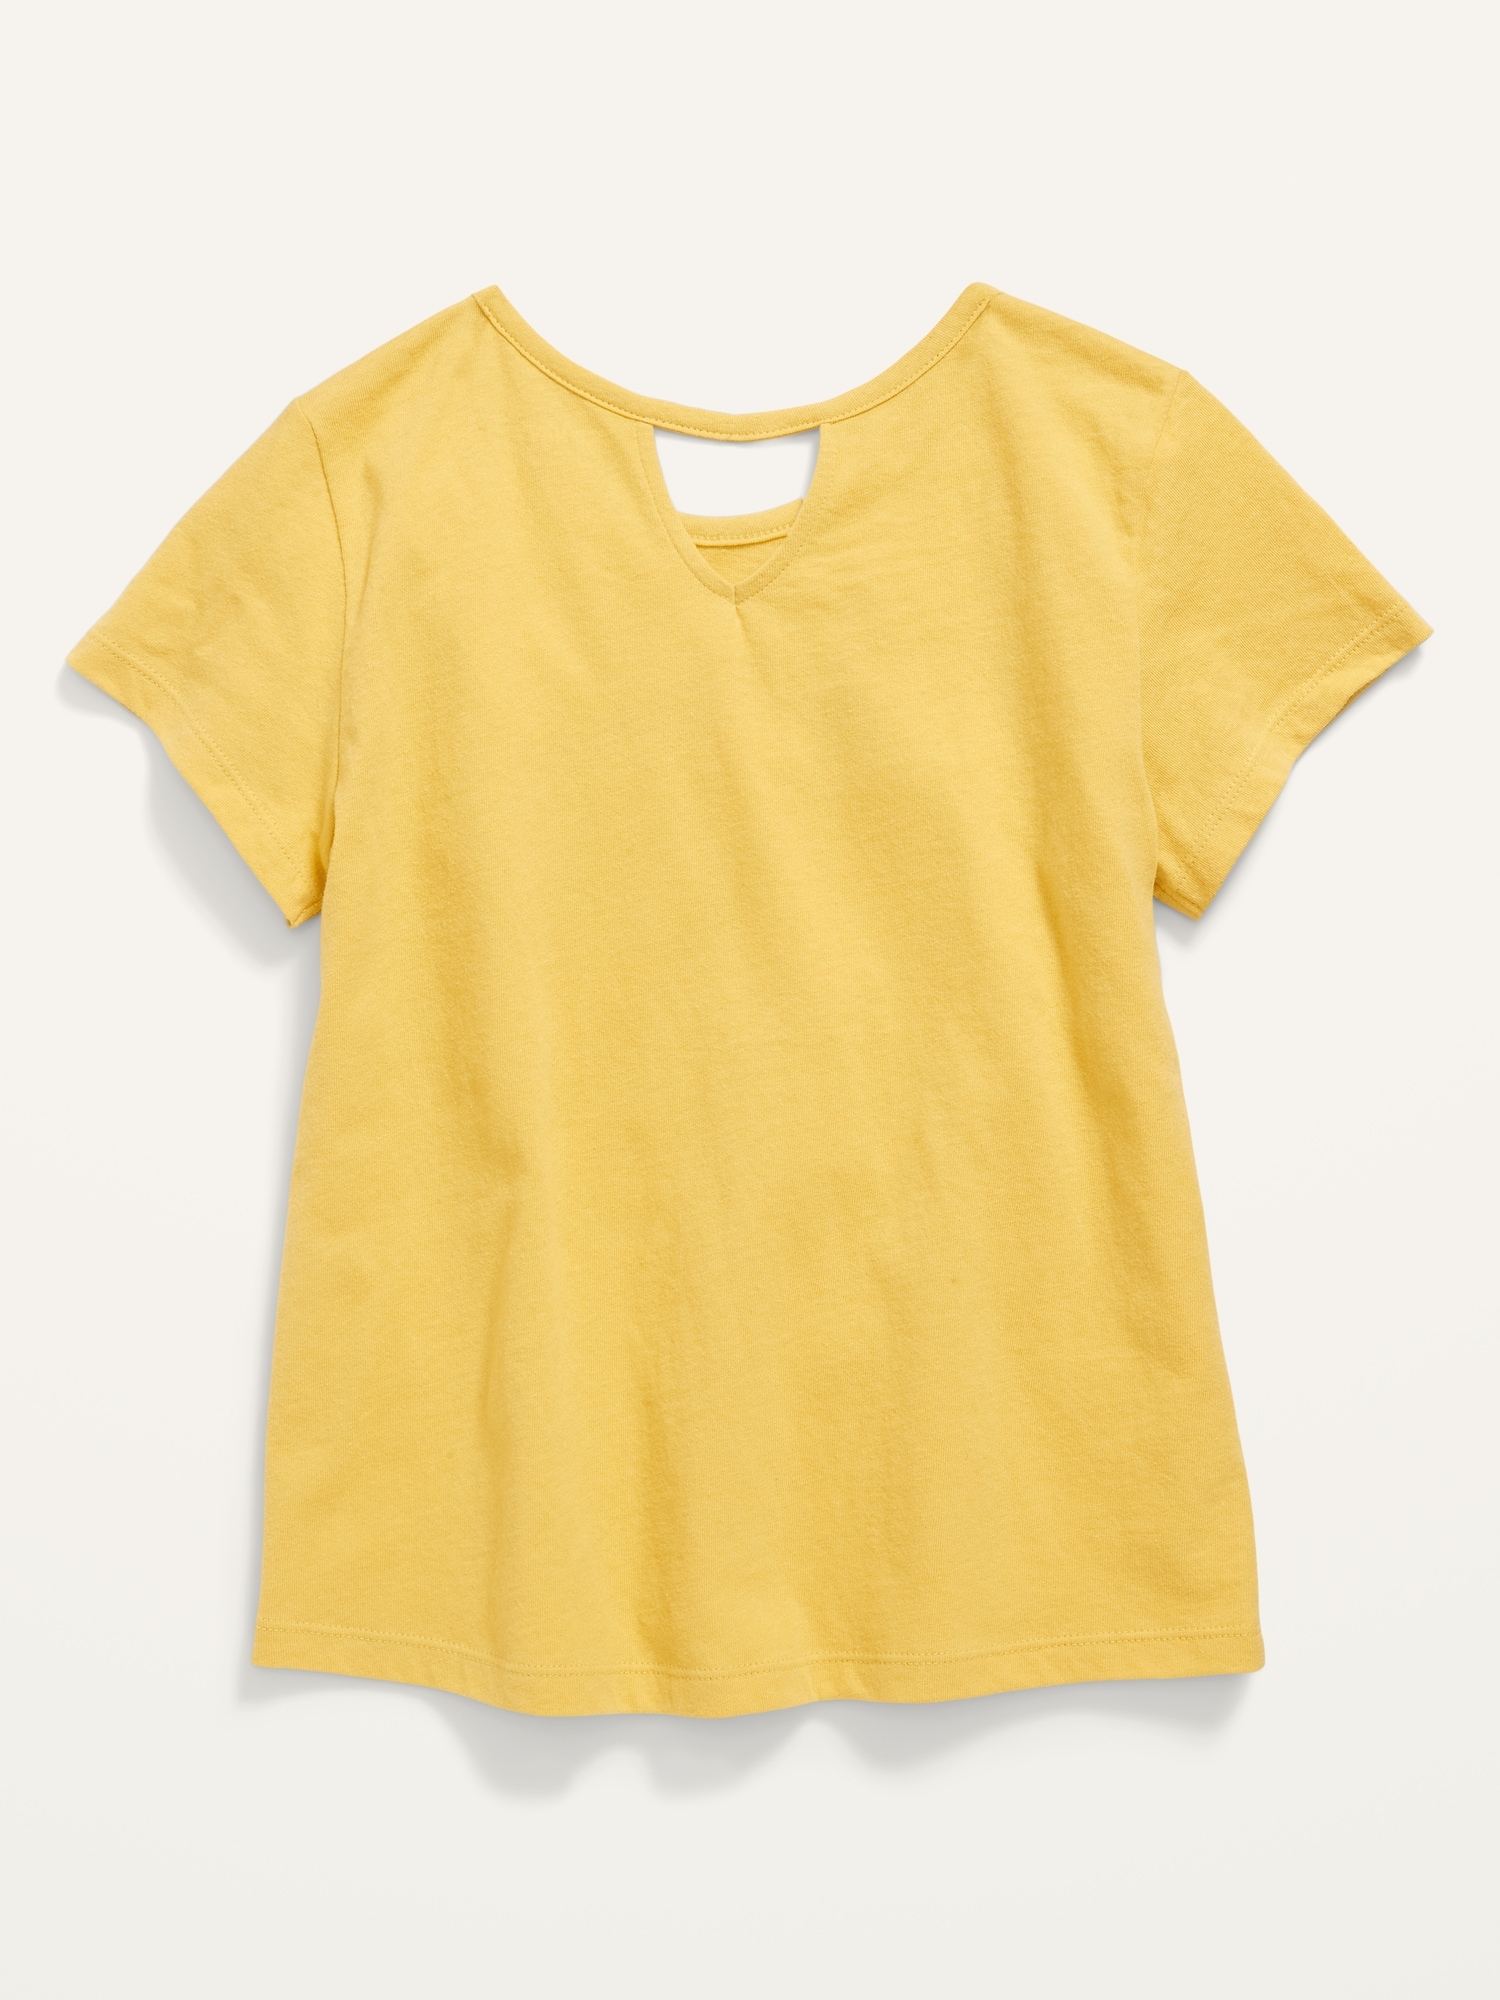 Short Sleeve Graphic T Shirt For Girls Old Navy